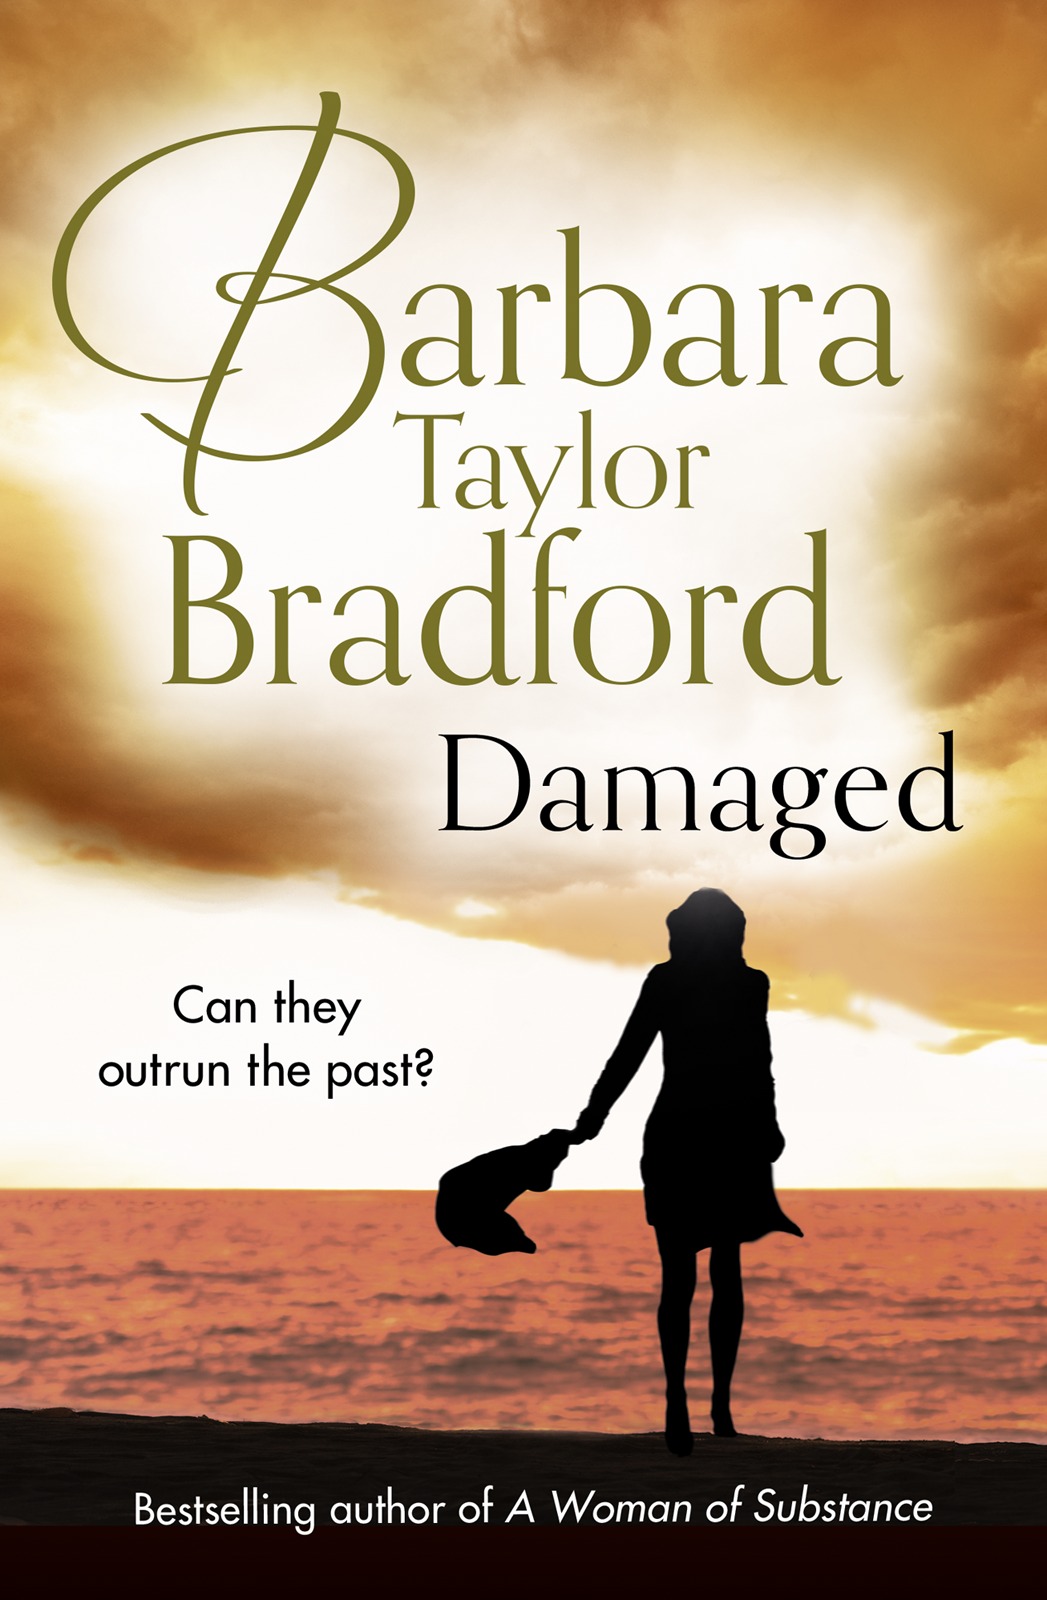 Damaged: A gripping short read, the perfect escape for an hour